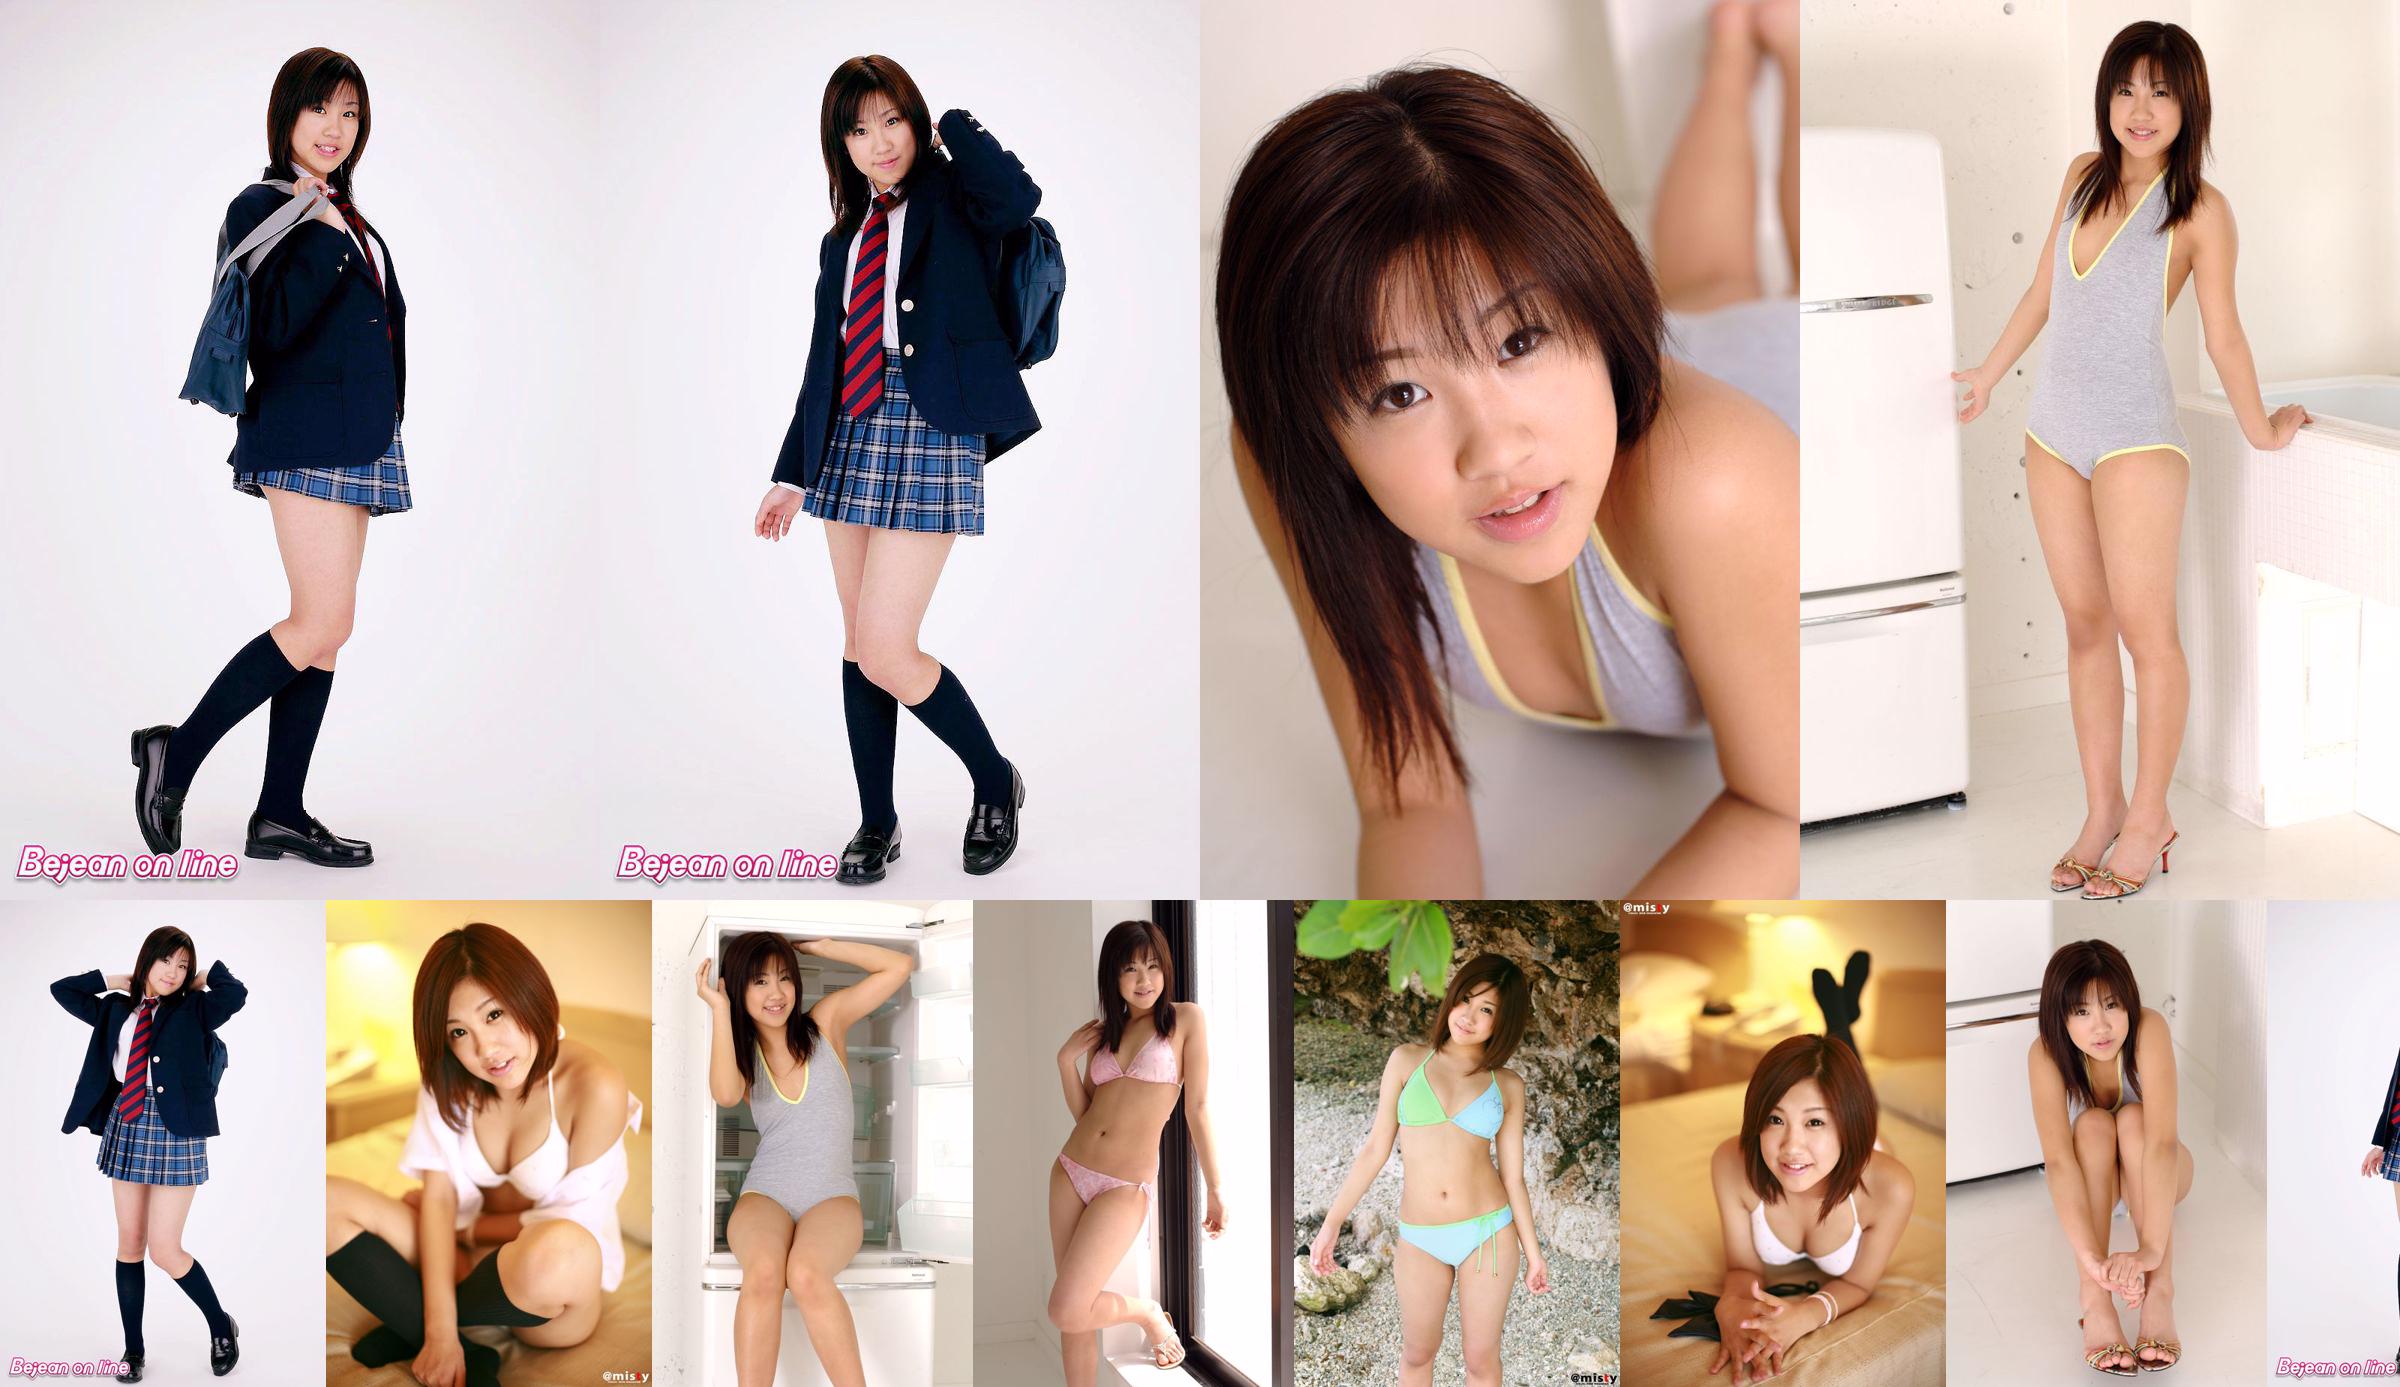 Private Bejean Girls’ School Maho Nagase 永瀬麻帆 [Bejean On Line] No.b33f30 Page 31